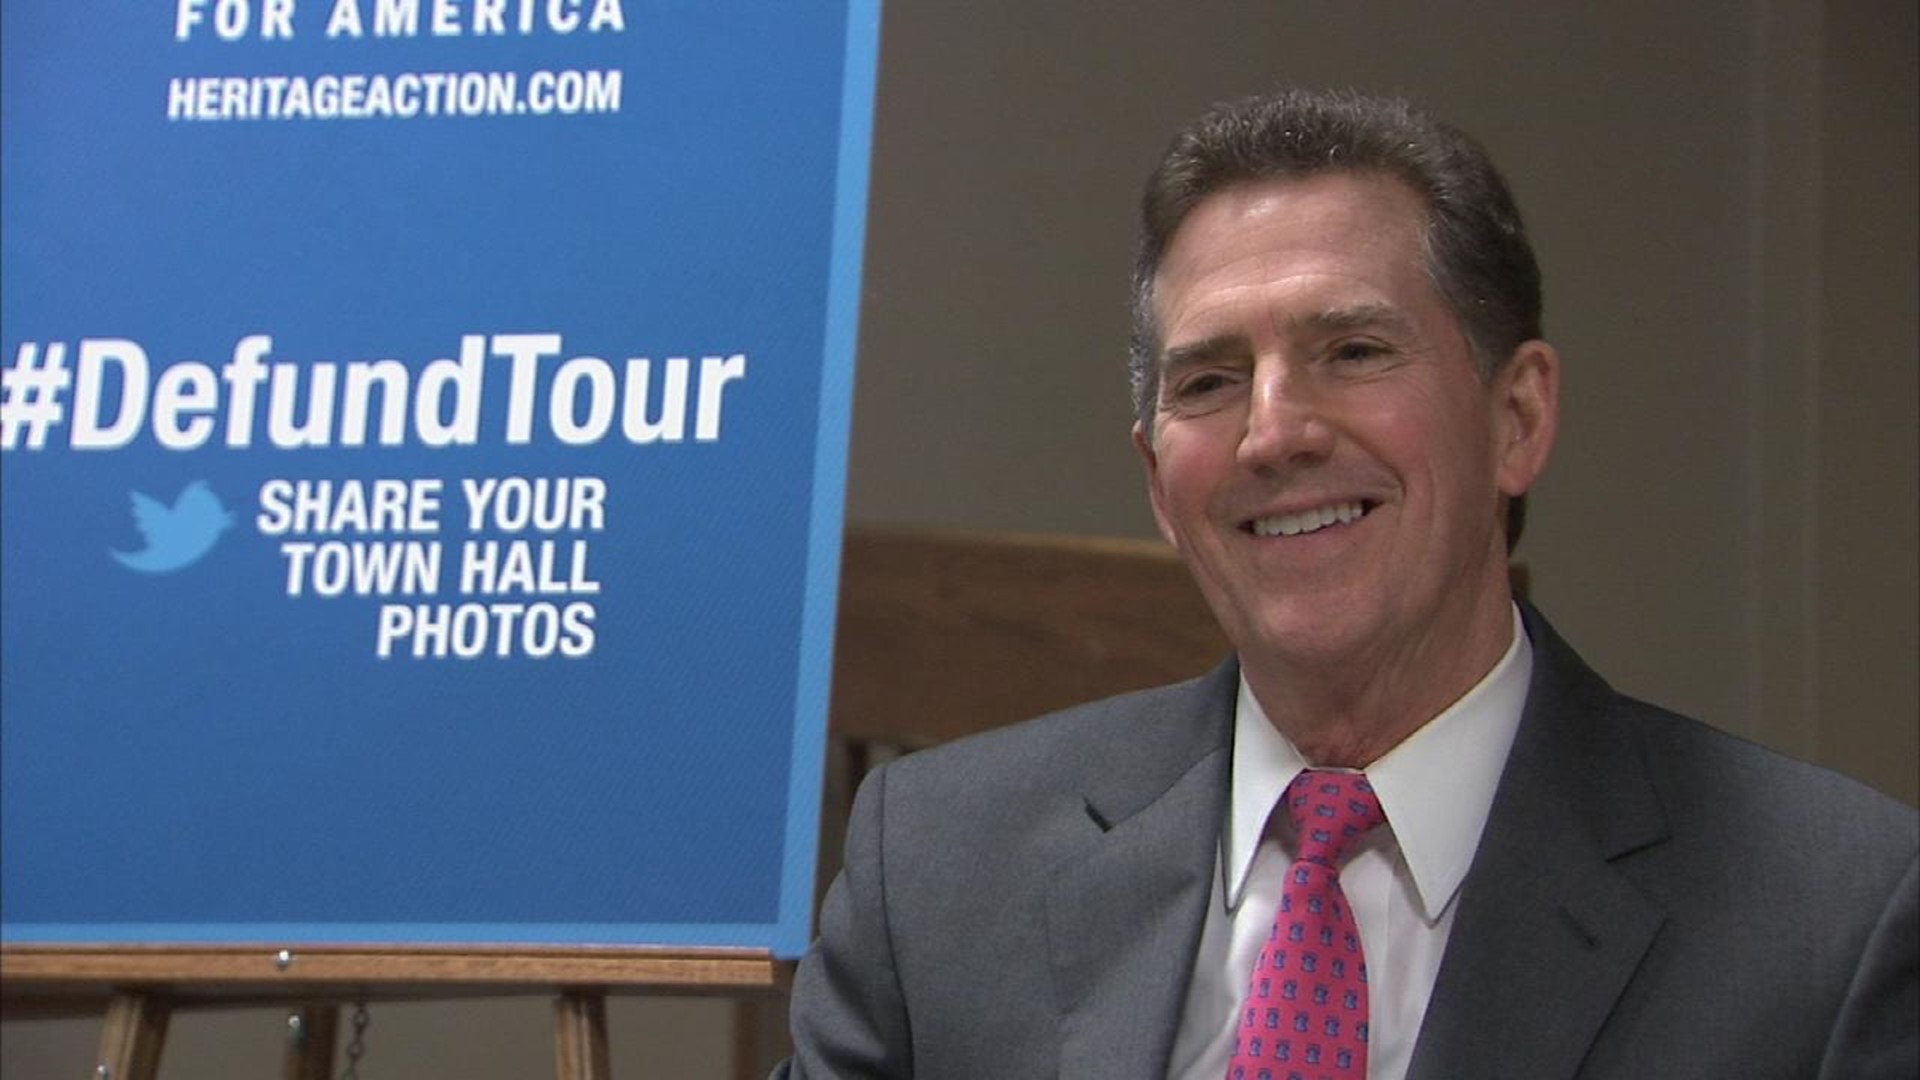 DeMint Brings "Defund Obamacare" Message To Central Ohio